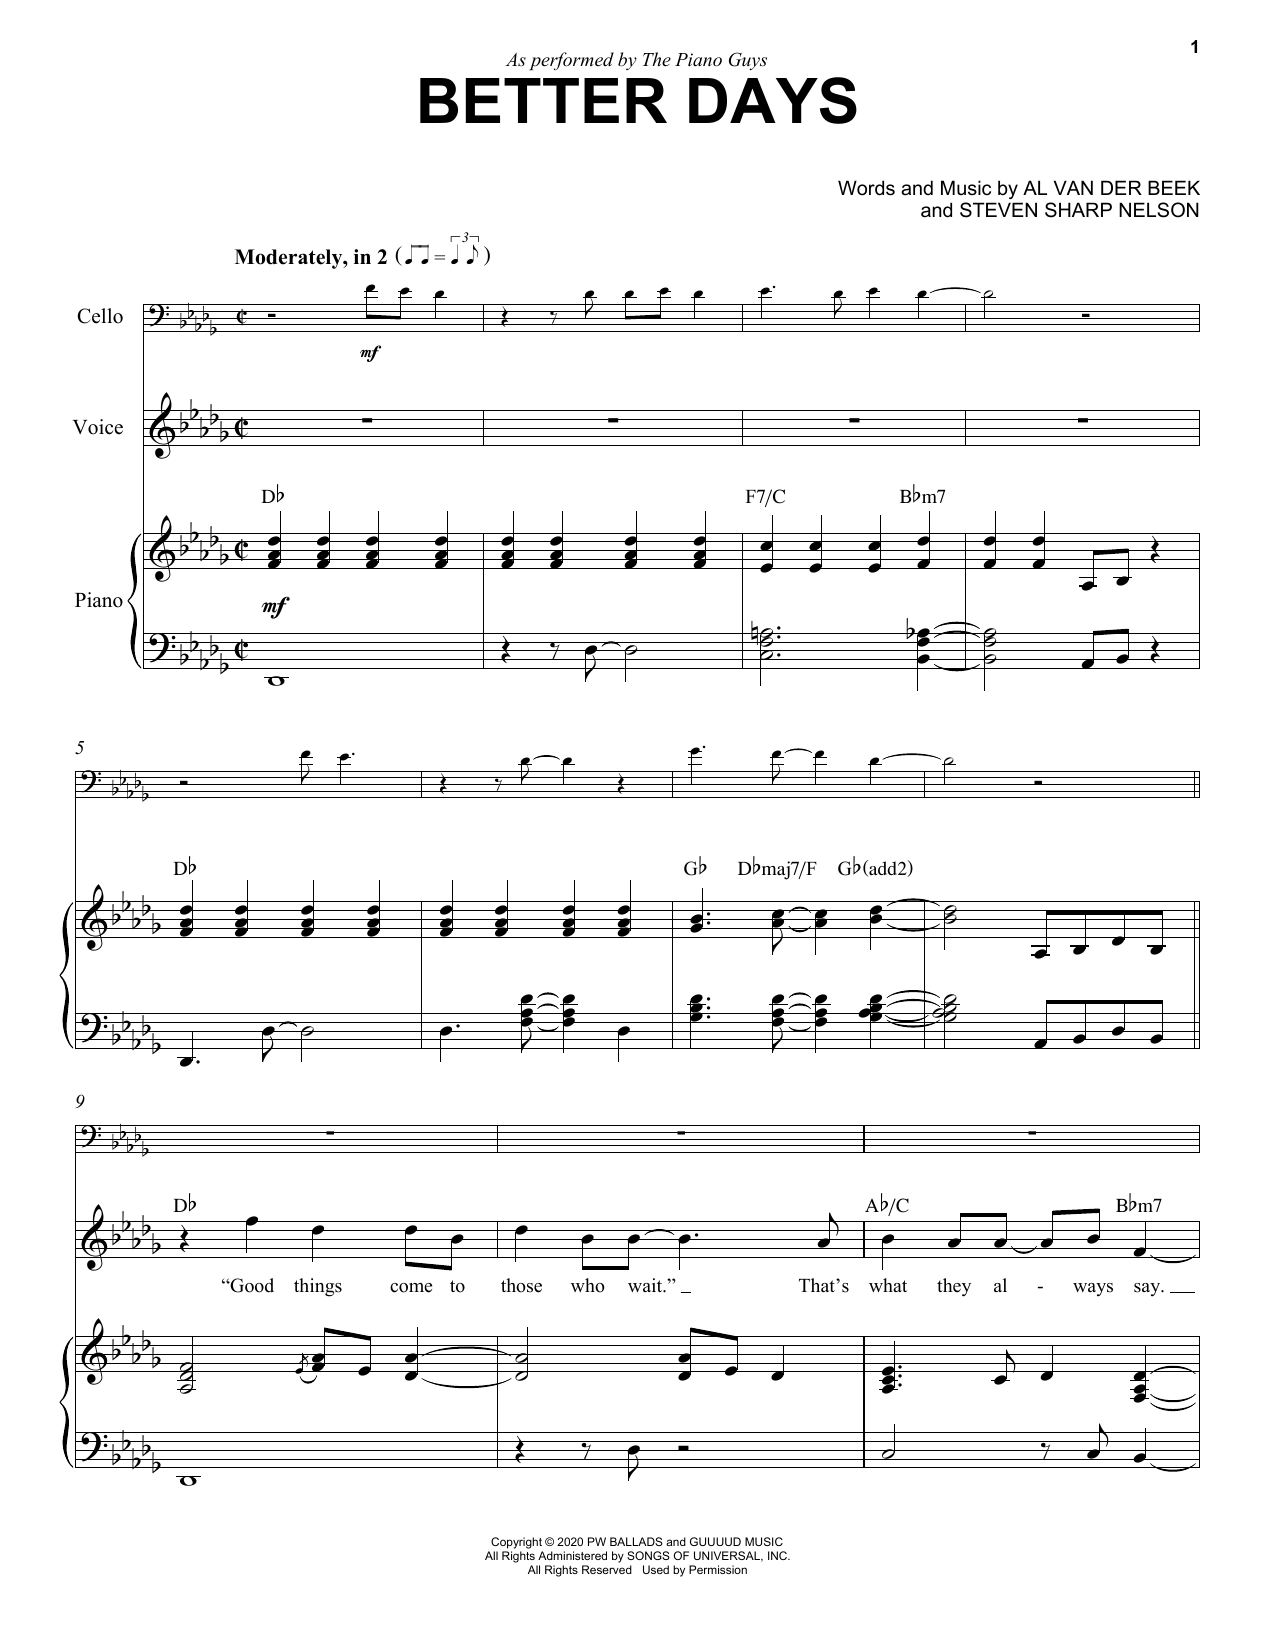 Download The Piano Guys Better Days Sheet Music